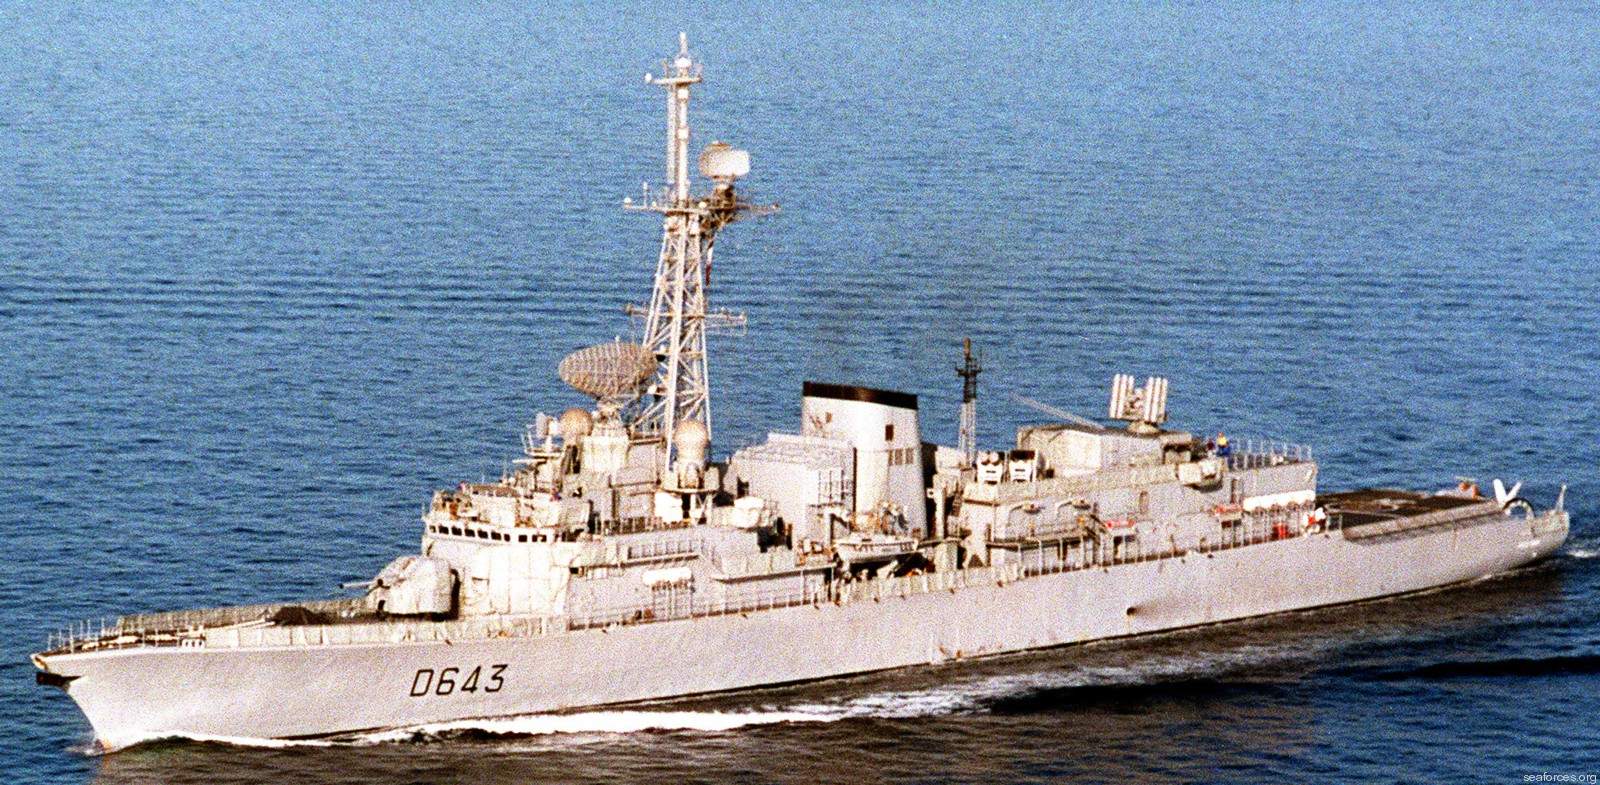 d-643 fs jean de vienne leygues class f70as asw frigate destroyer french navy marine nationale 13